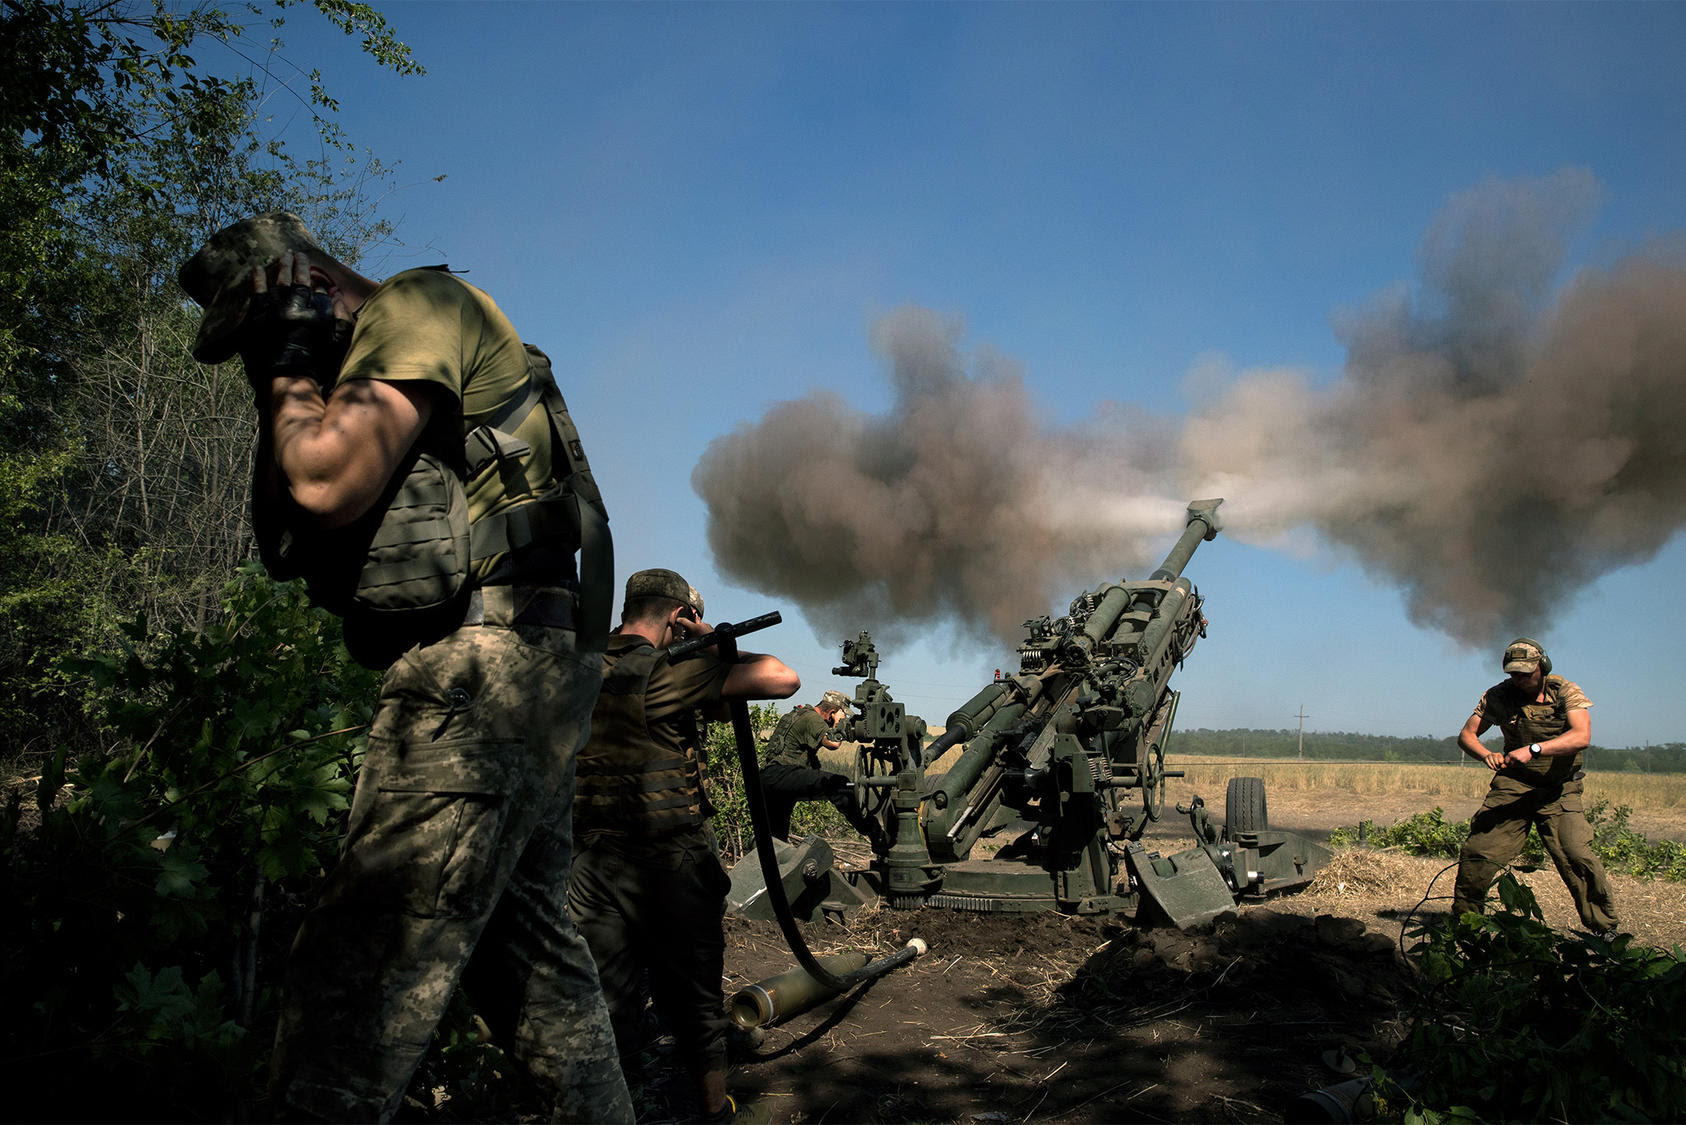 Ukrainians fire at Russian forces in Donetsk province, a target of Russia’s current, narrowed offensive. Broad evidence shows Moscow has not narrowed its goals in Ukraine, a point vital to any notion for peace talks. (Tyler Hicks/The New York Times)